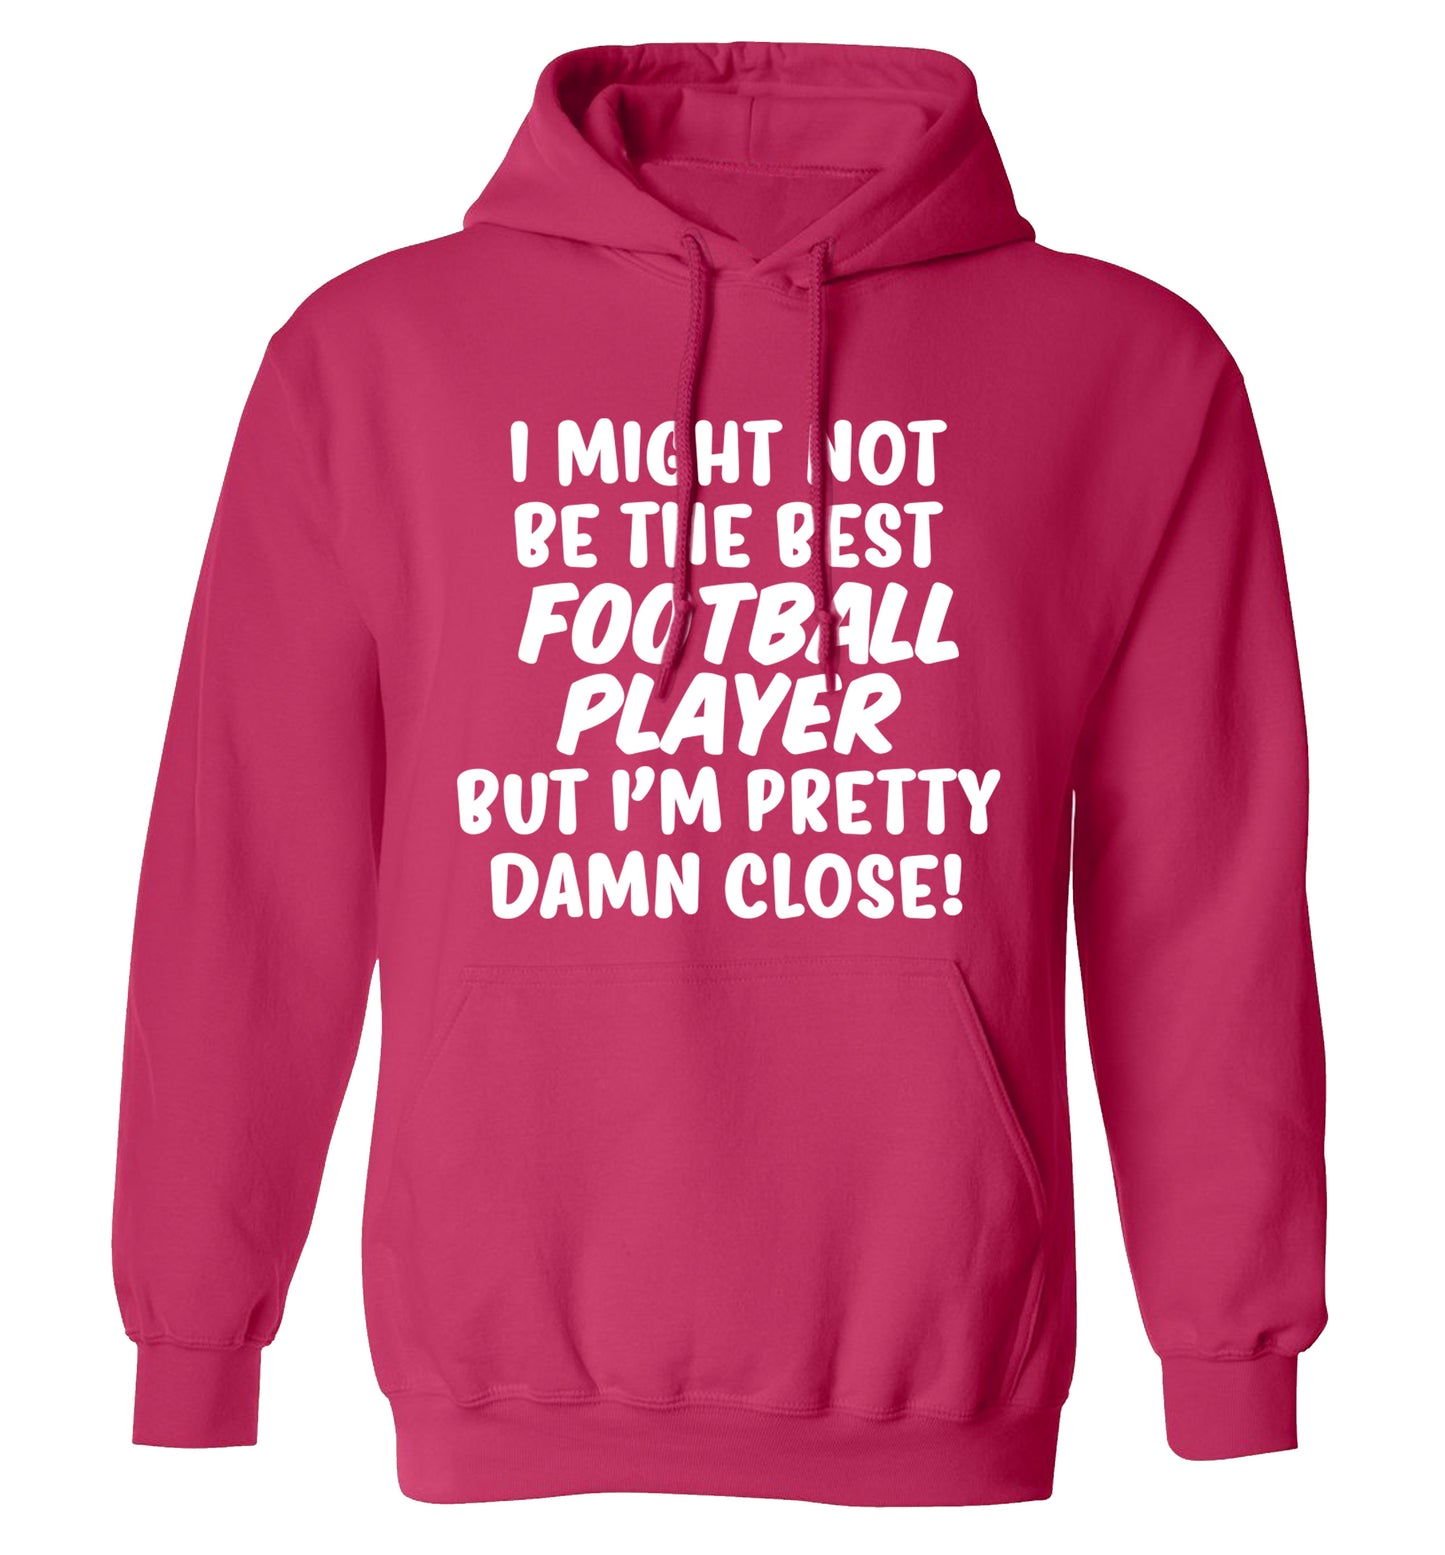 I might not be the best football player but I'm pretty close! adults unisexpink hoodie 2XL